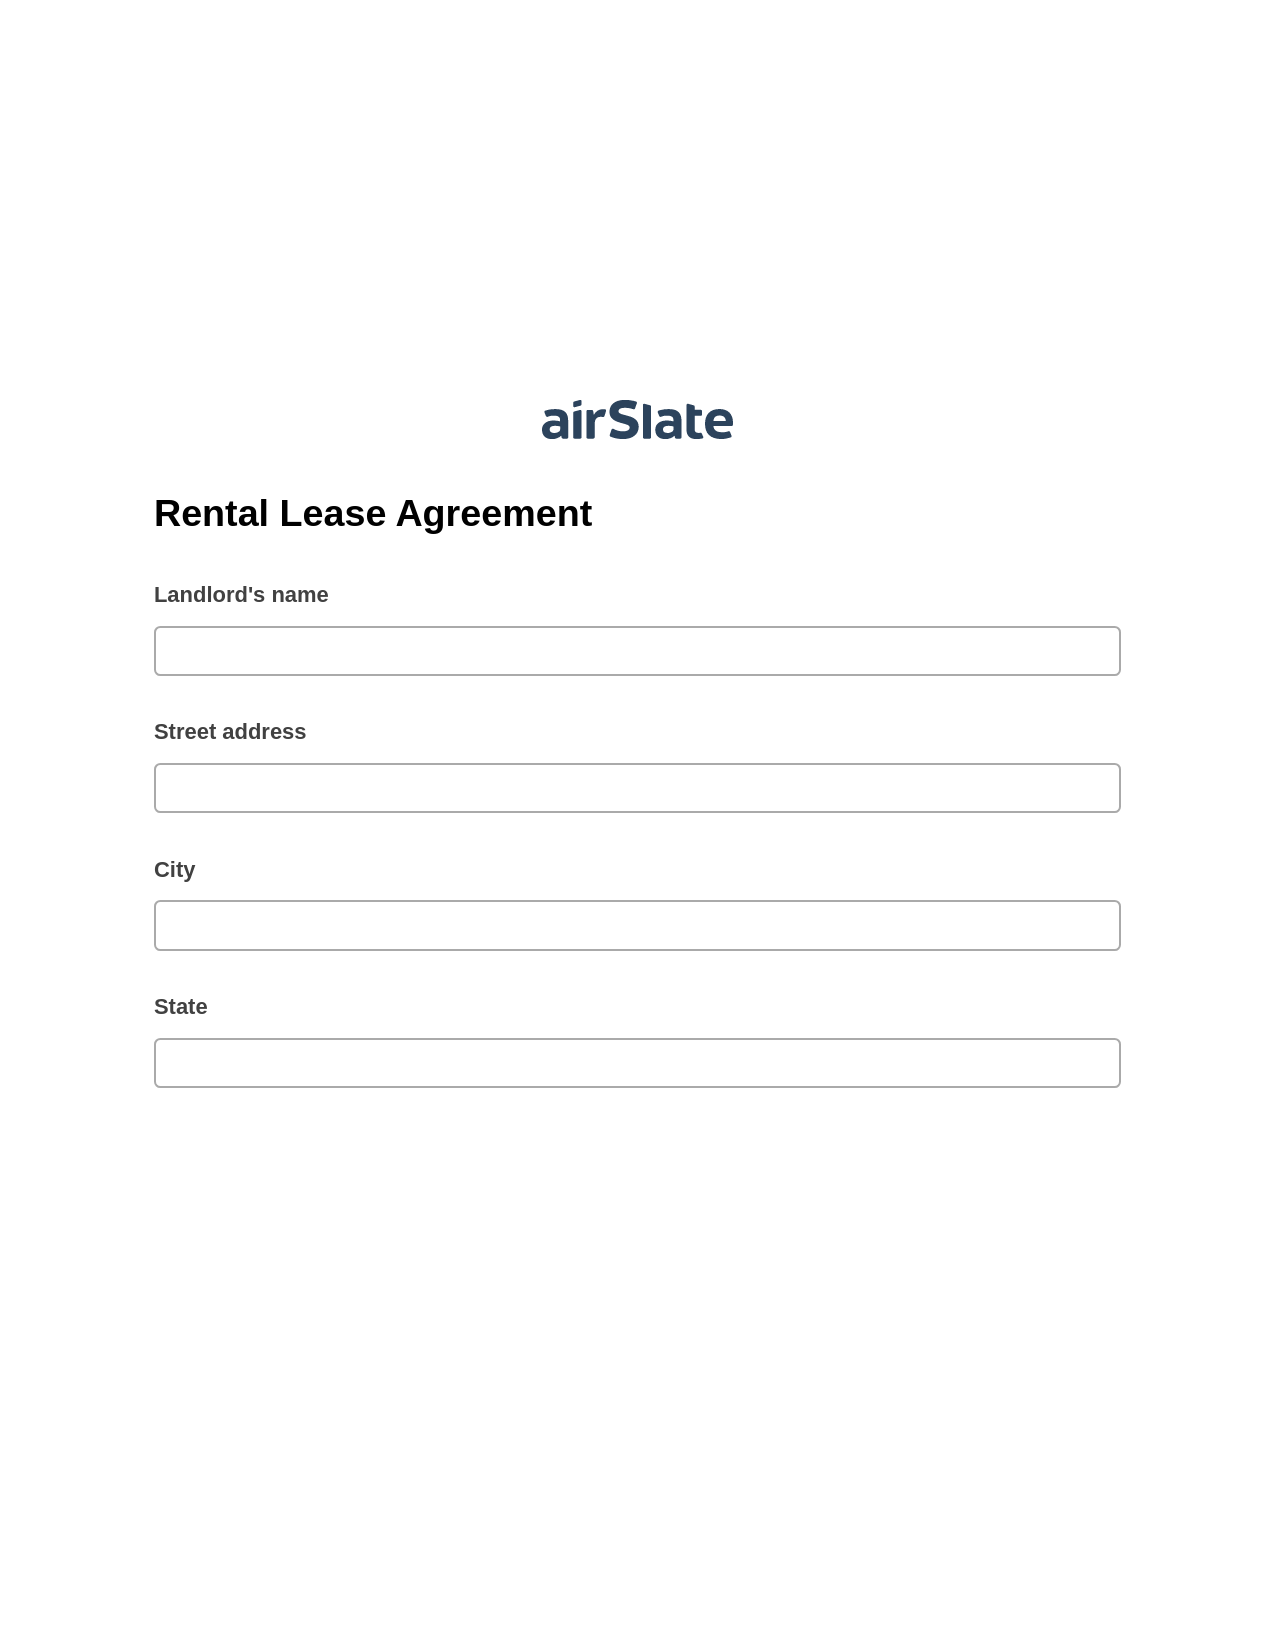 Rental Lease Agreement Pre-fill from CSV File Bot, Google Cloud Print Bot, Export to Excel 365 Bot